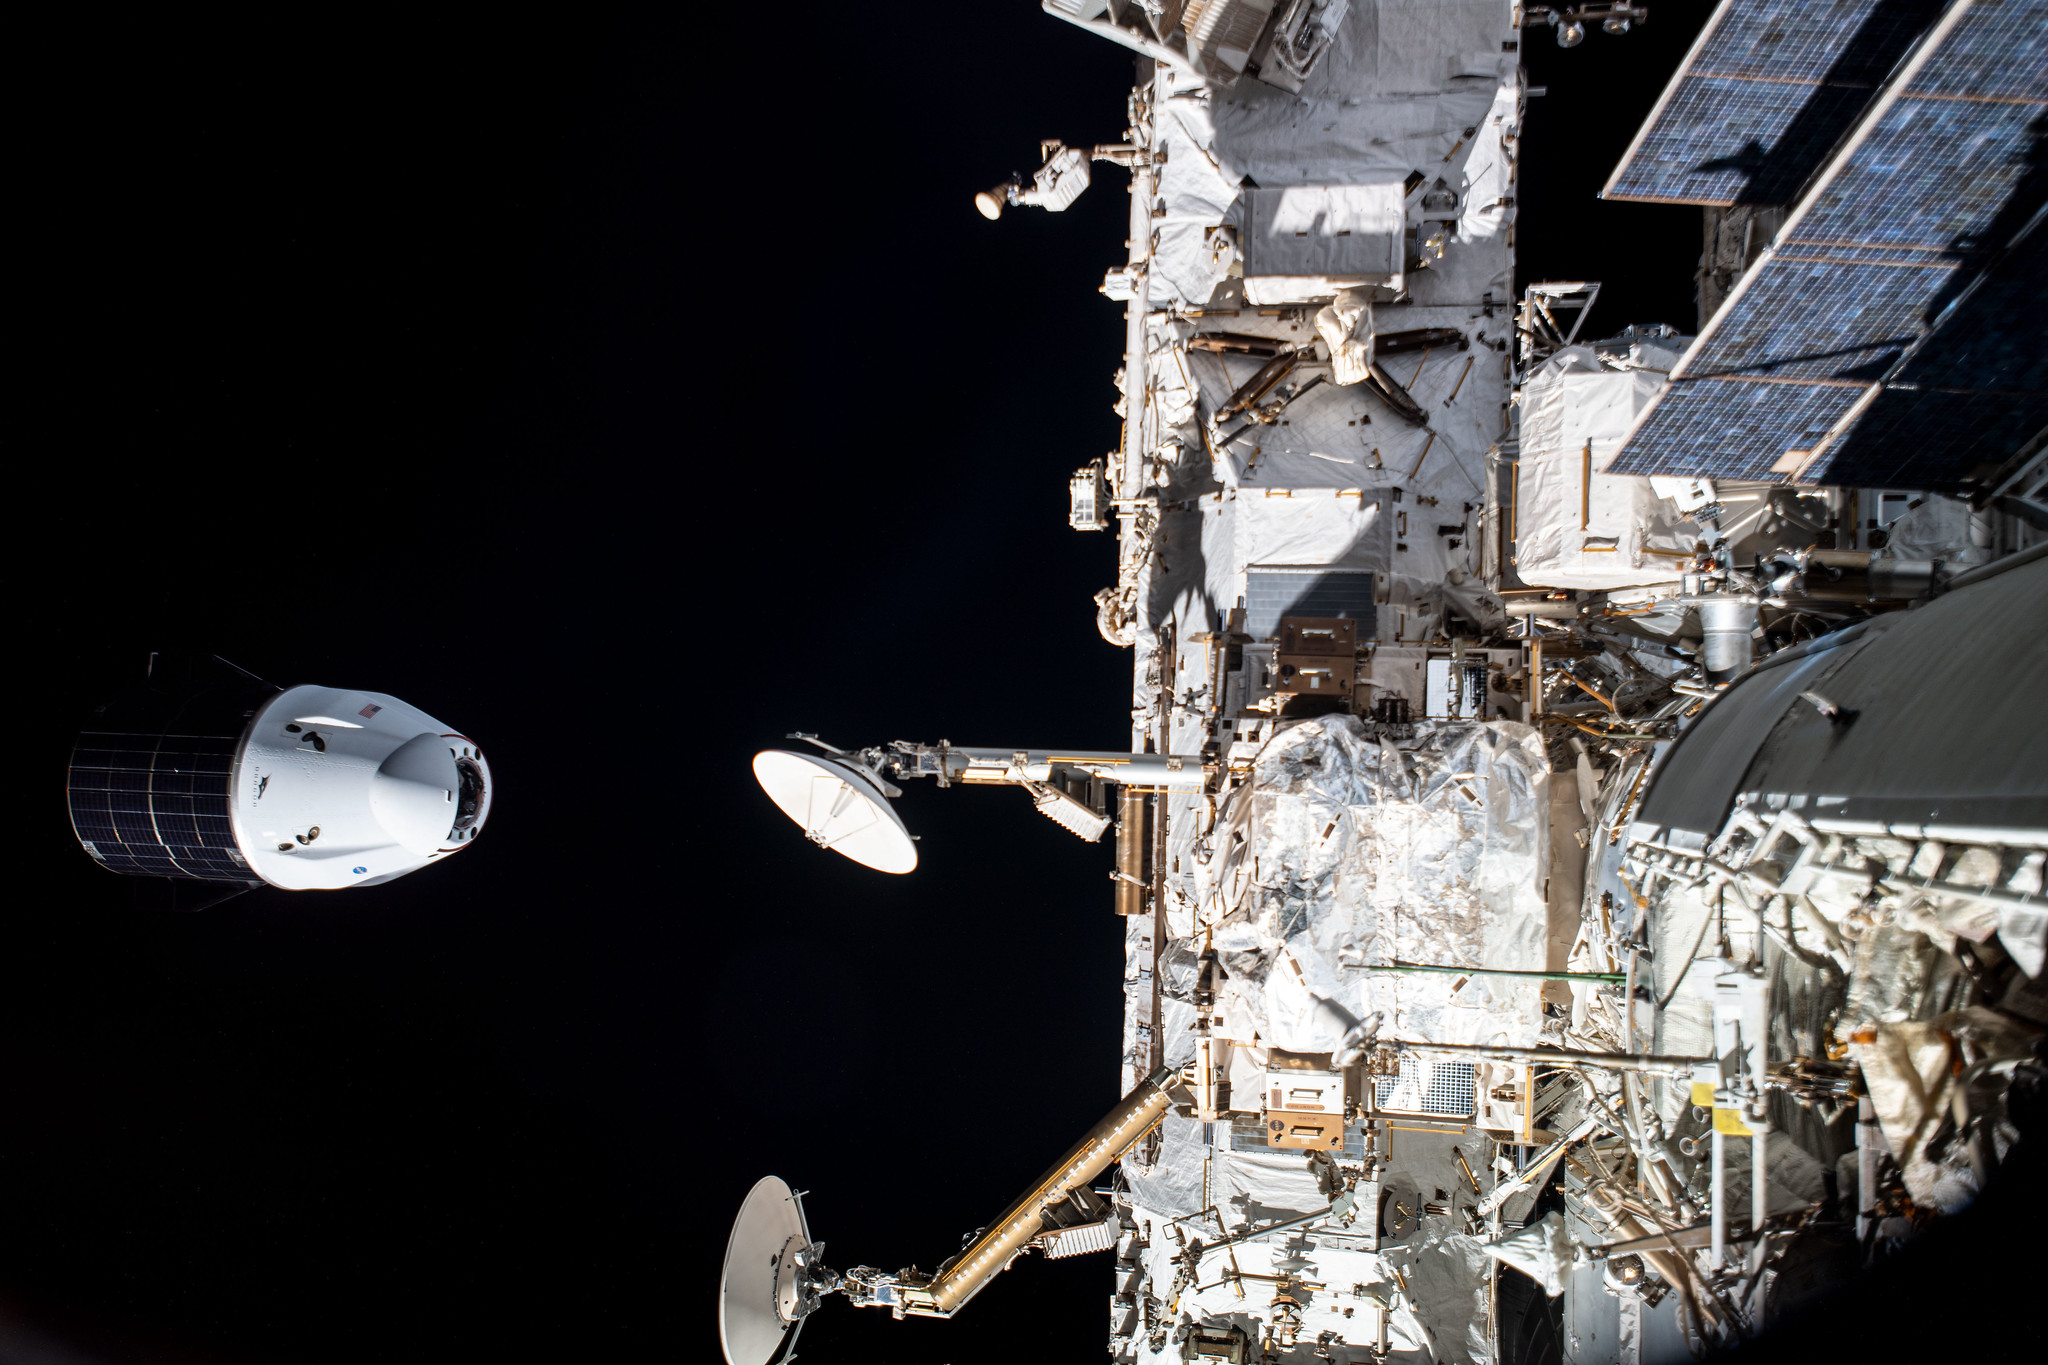 The SpaceX Cargo Dragon resupply ship is photographed departing the International Space Station after it undocked from the Harmony module's space-facing international docking adapter on July 8, 2021.